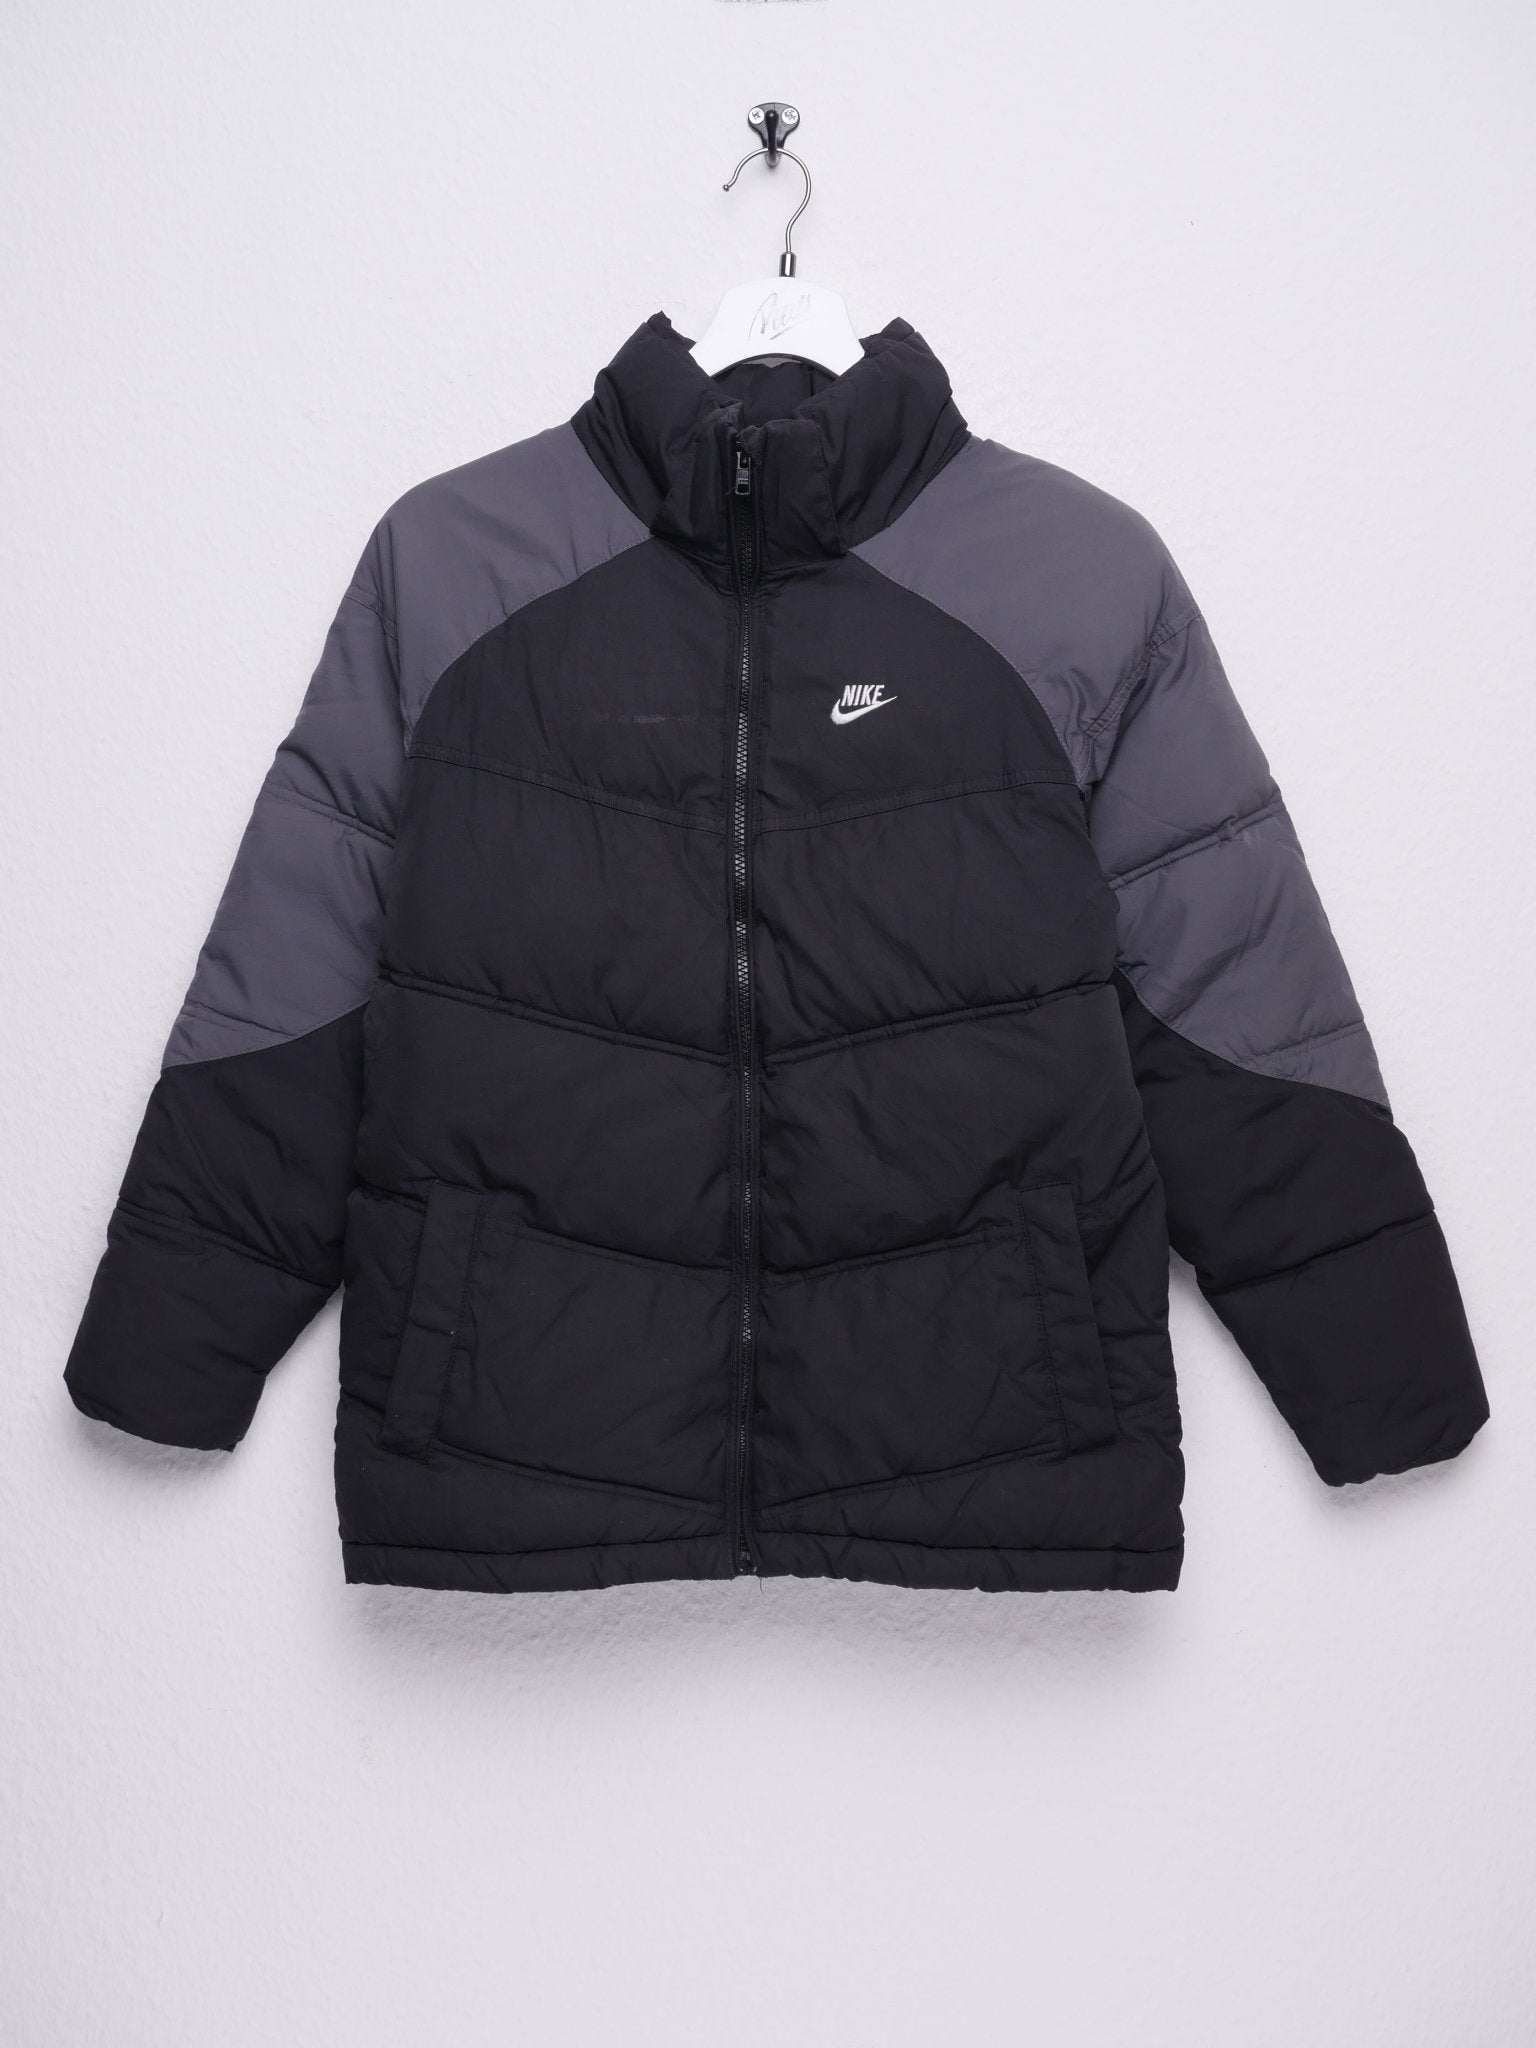 Nike embroidered Logo two toned Puffer Jacket - Peeces